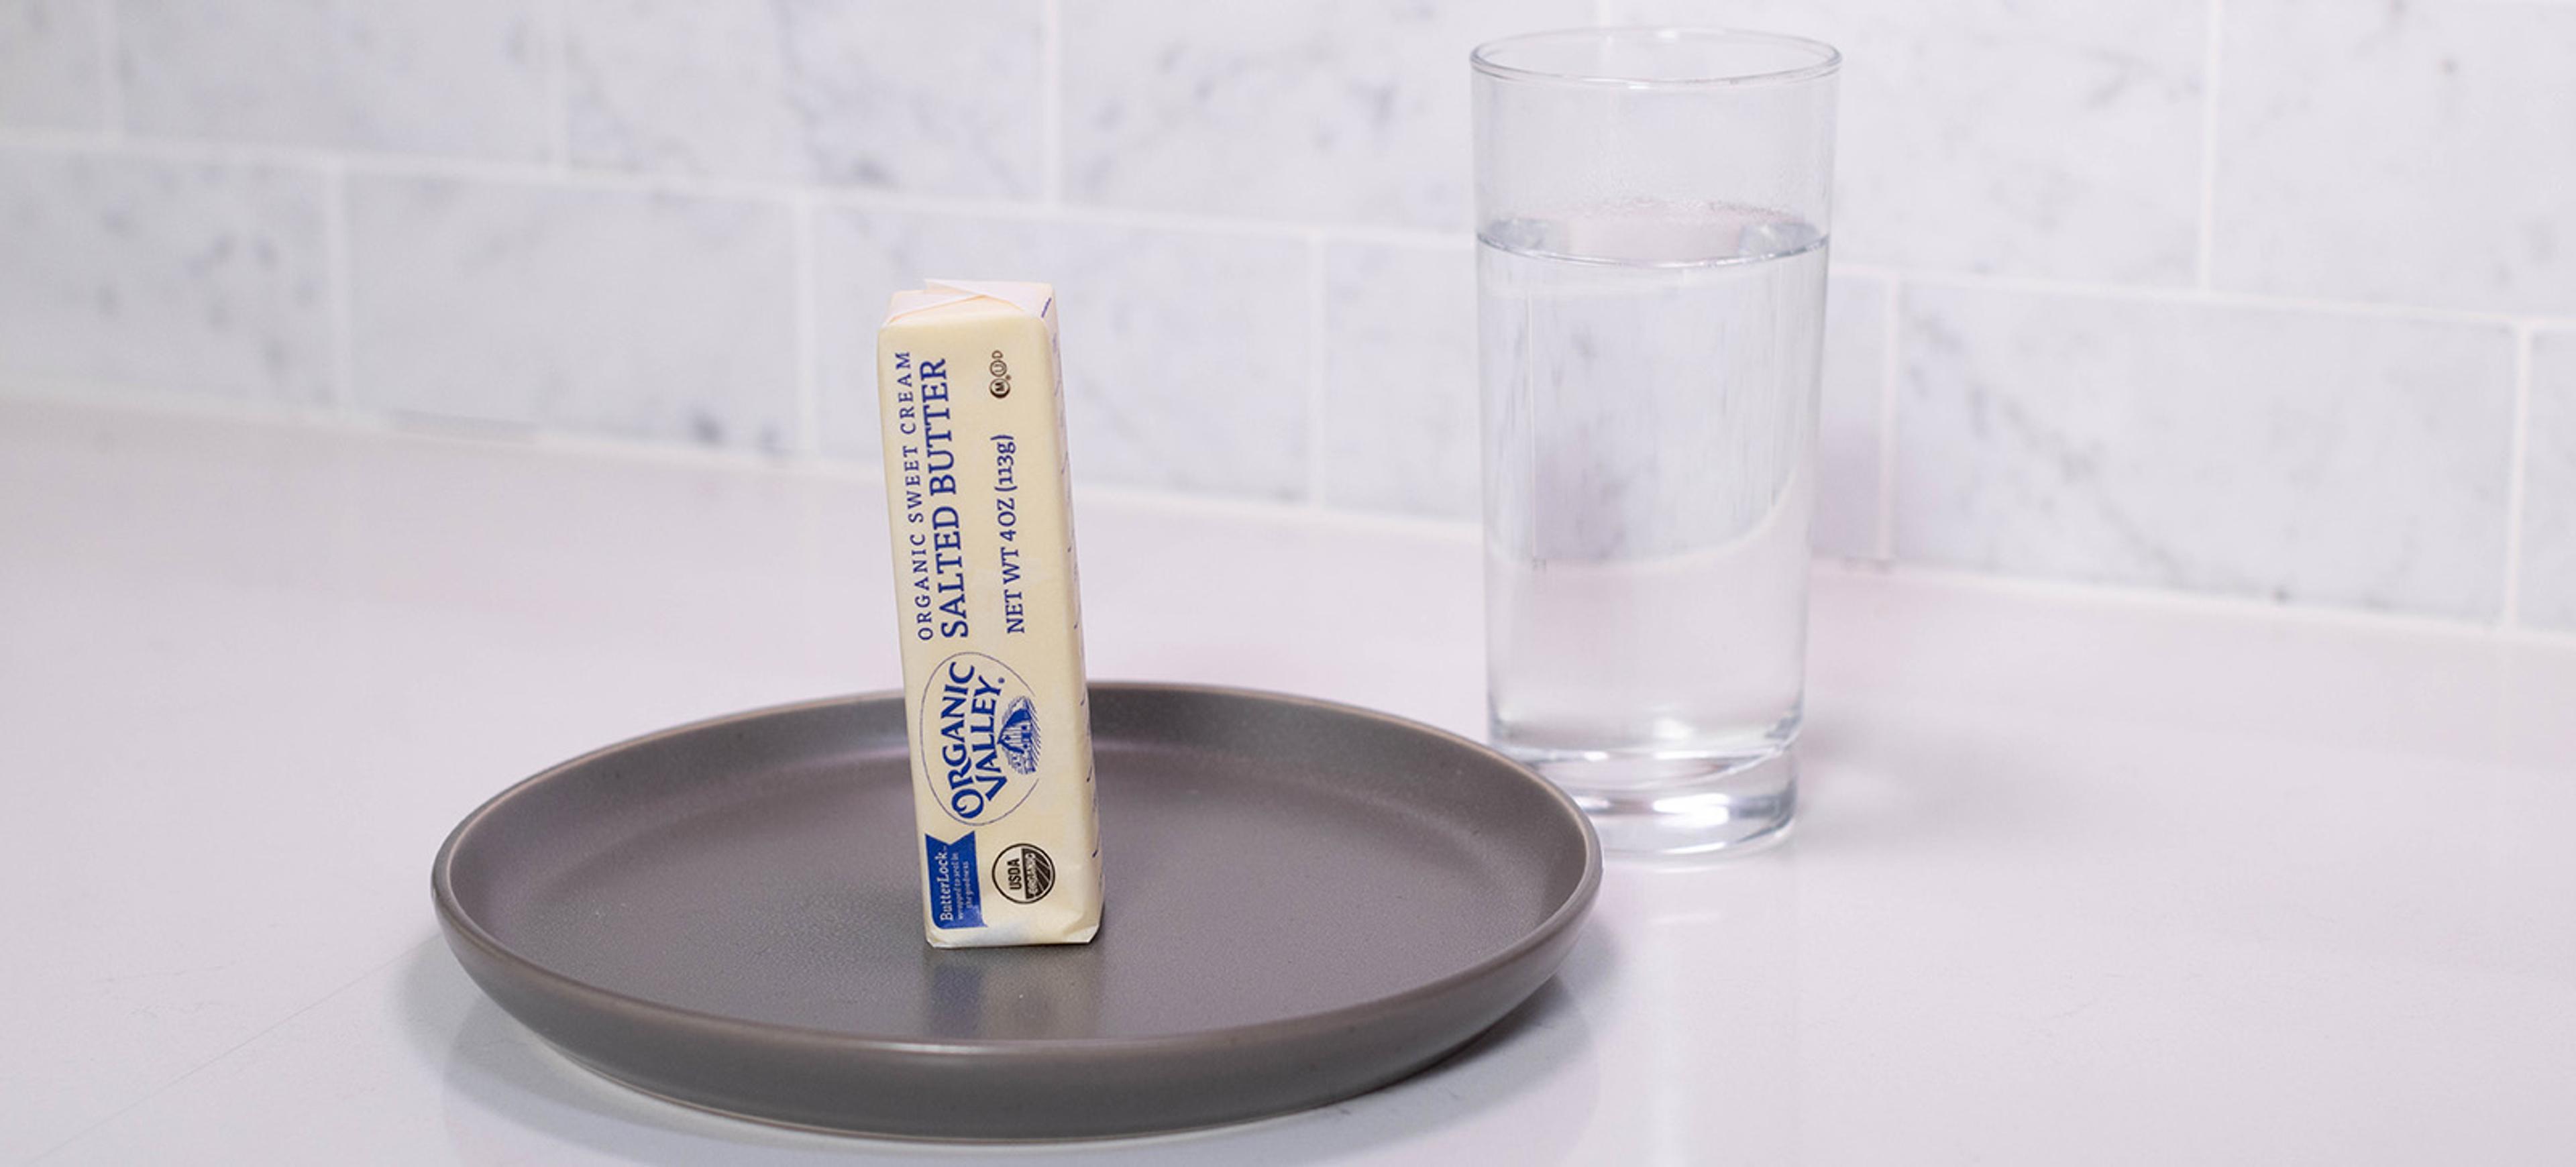 A stick of butter next to a glass of water.